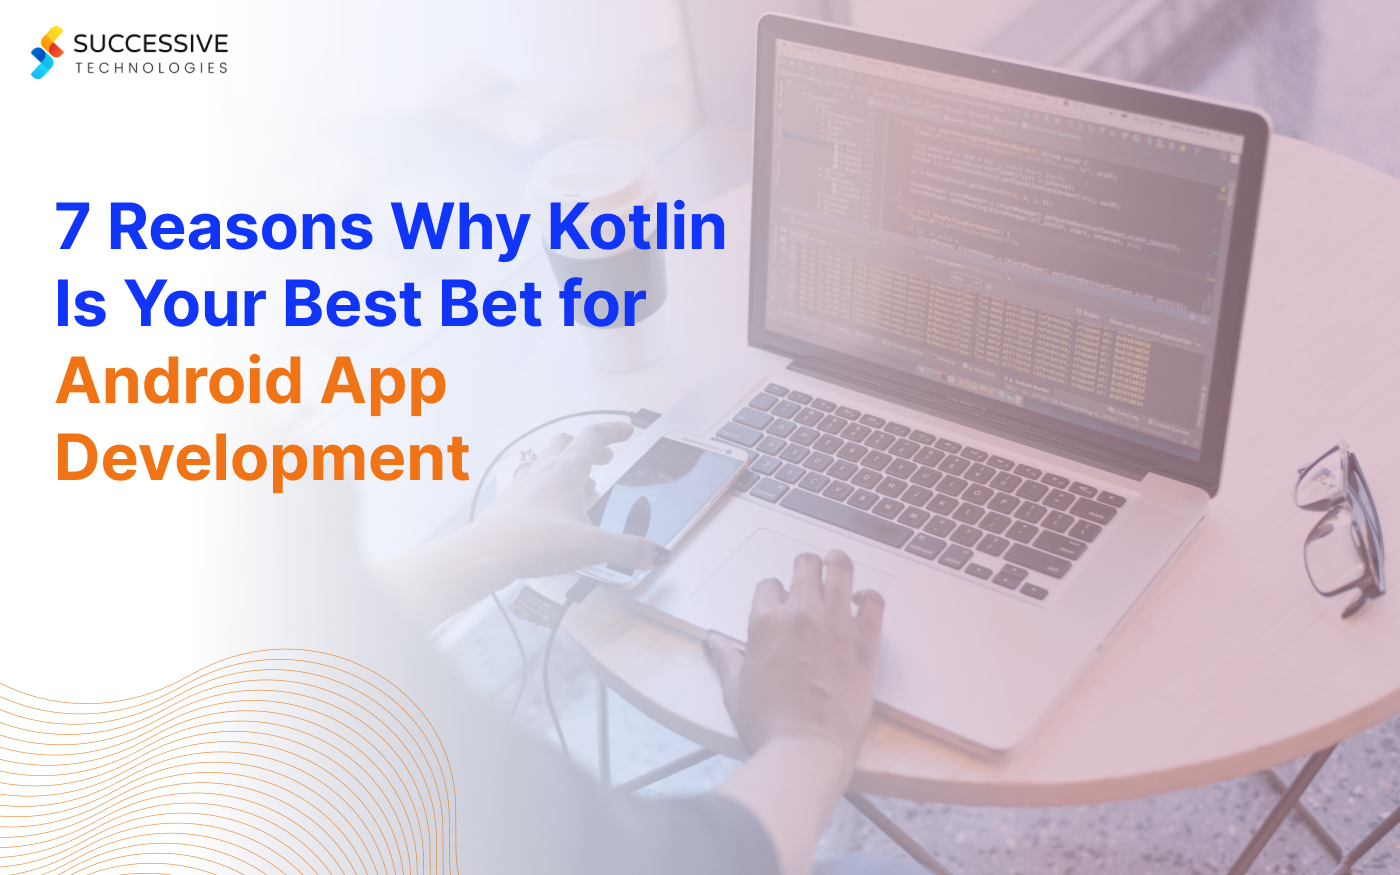 7 Reasons Why Kotlin Is Your Best Bet for Android App Development